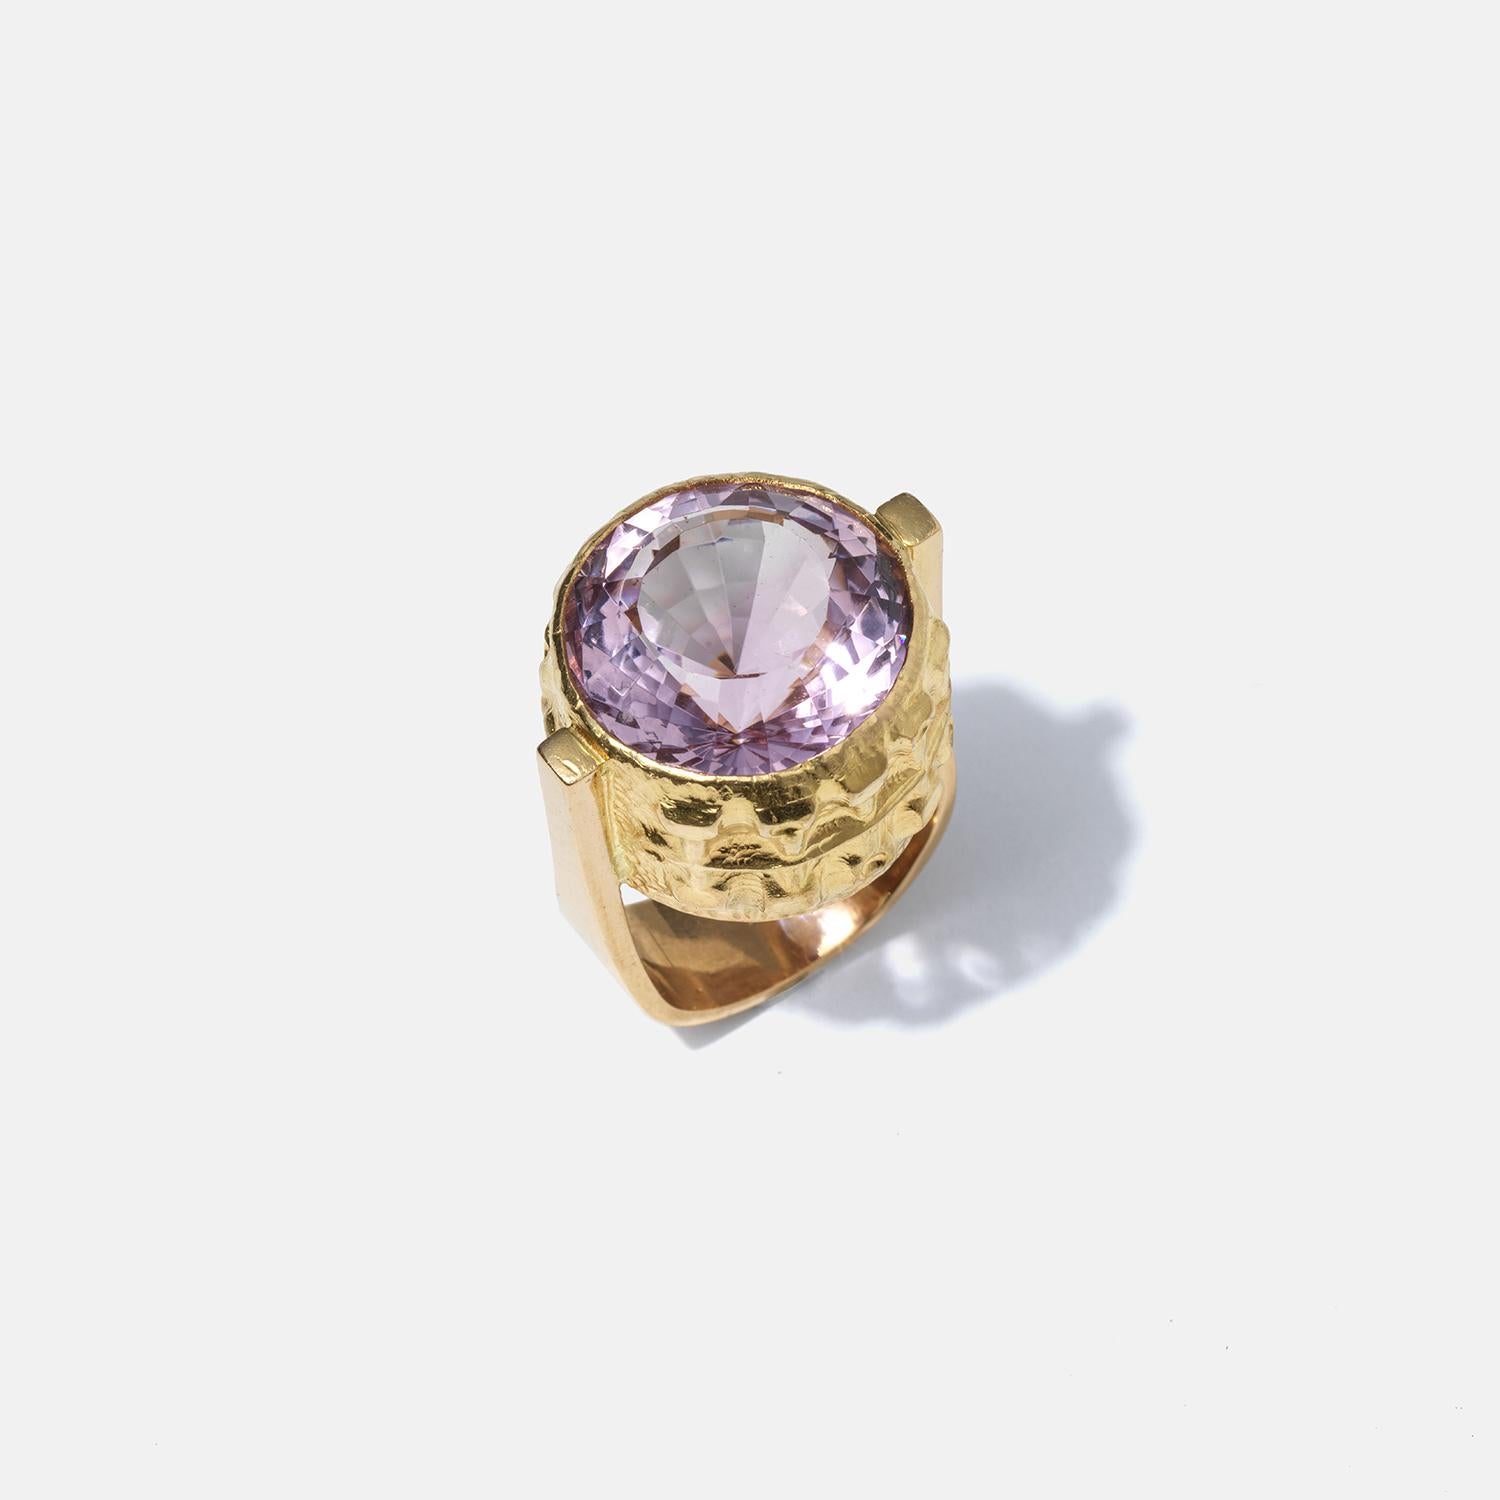 Round Cut Vintage 18k Gold and Amethyst Ring by Swedish master Eric Robbert 1969 For Sale